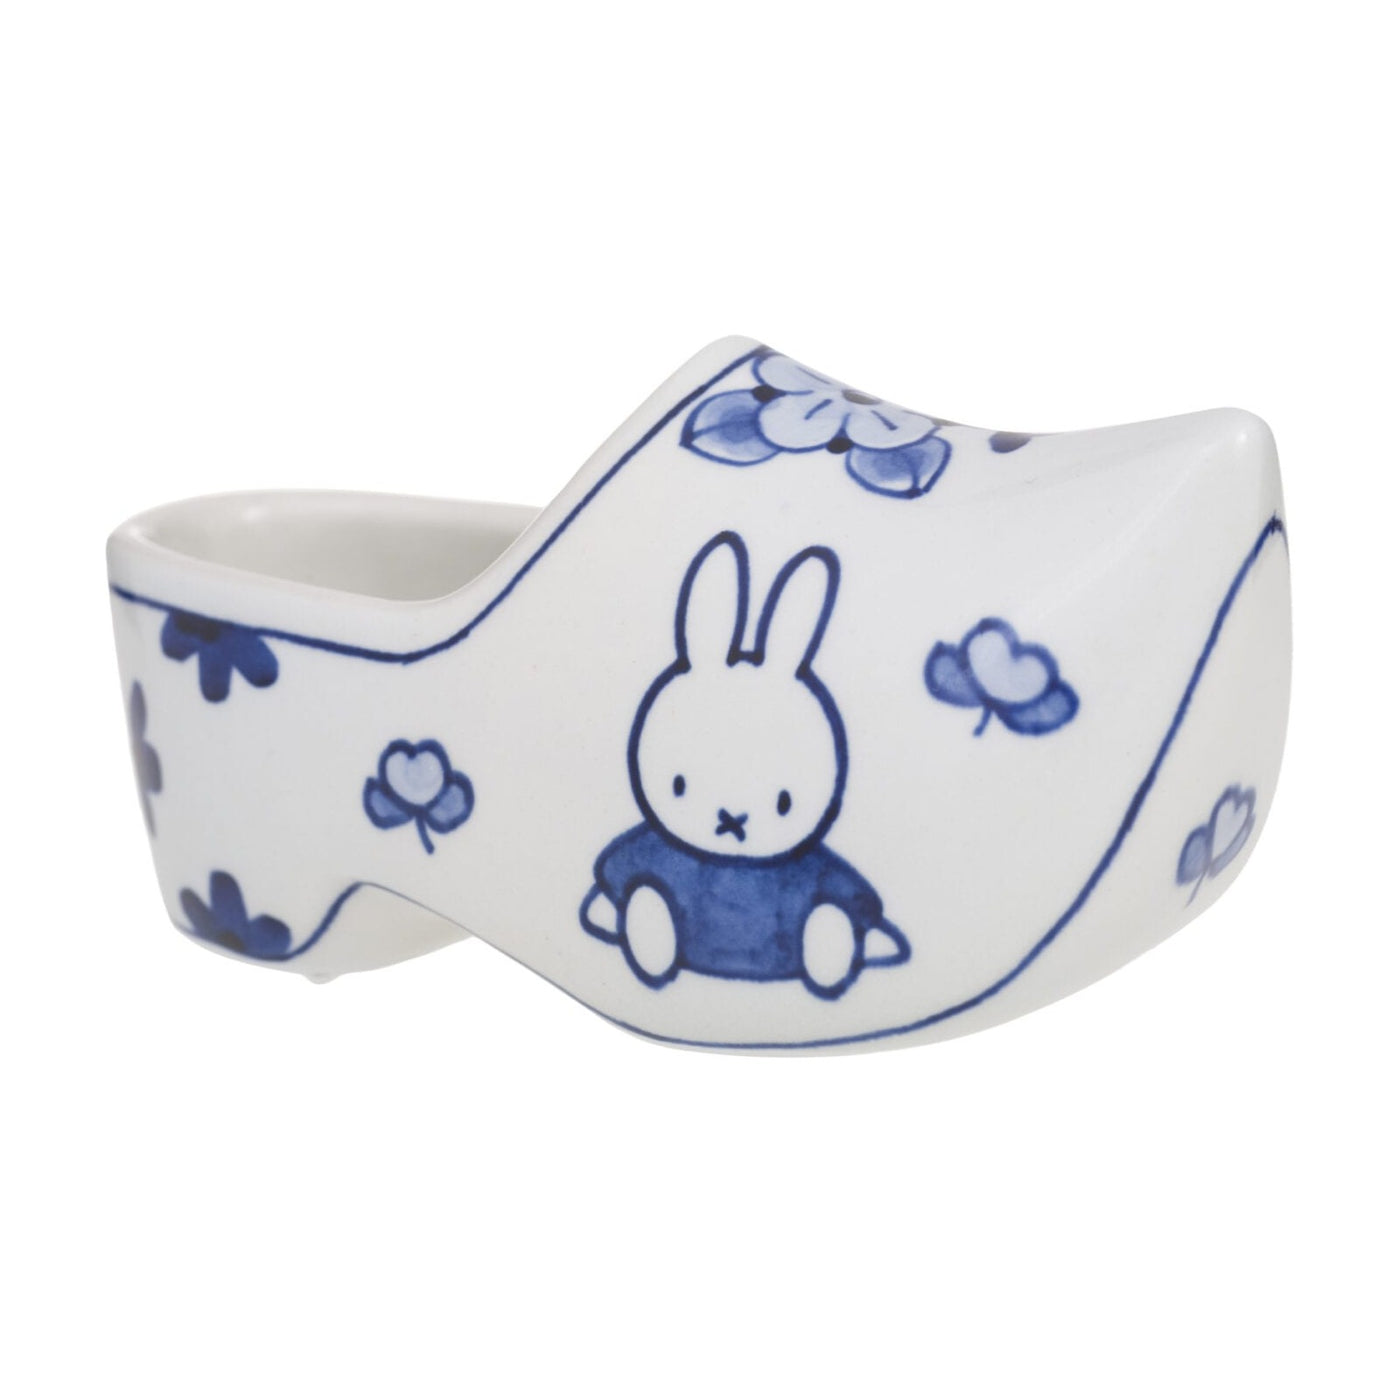 Clog Miffy Hand-Painted Delft Blue by Royal Delft